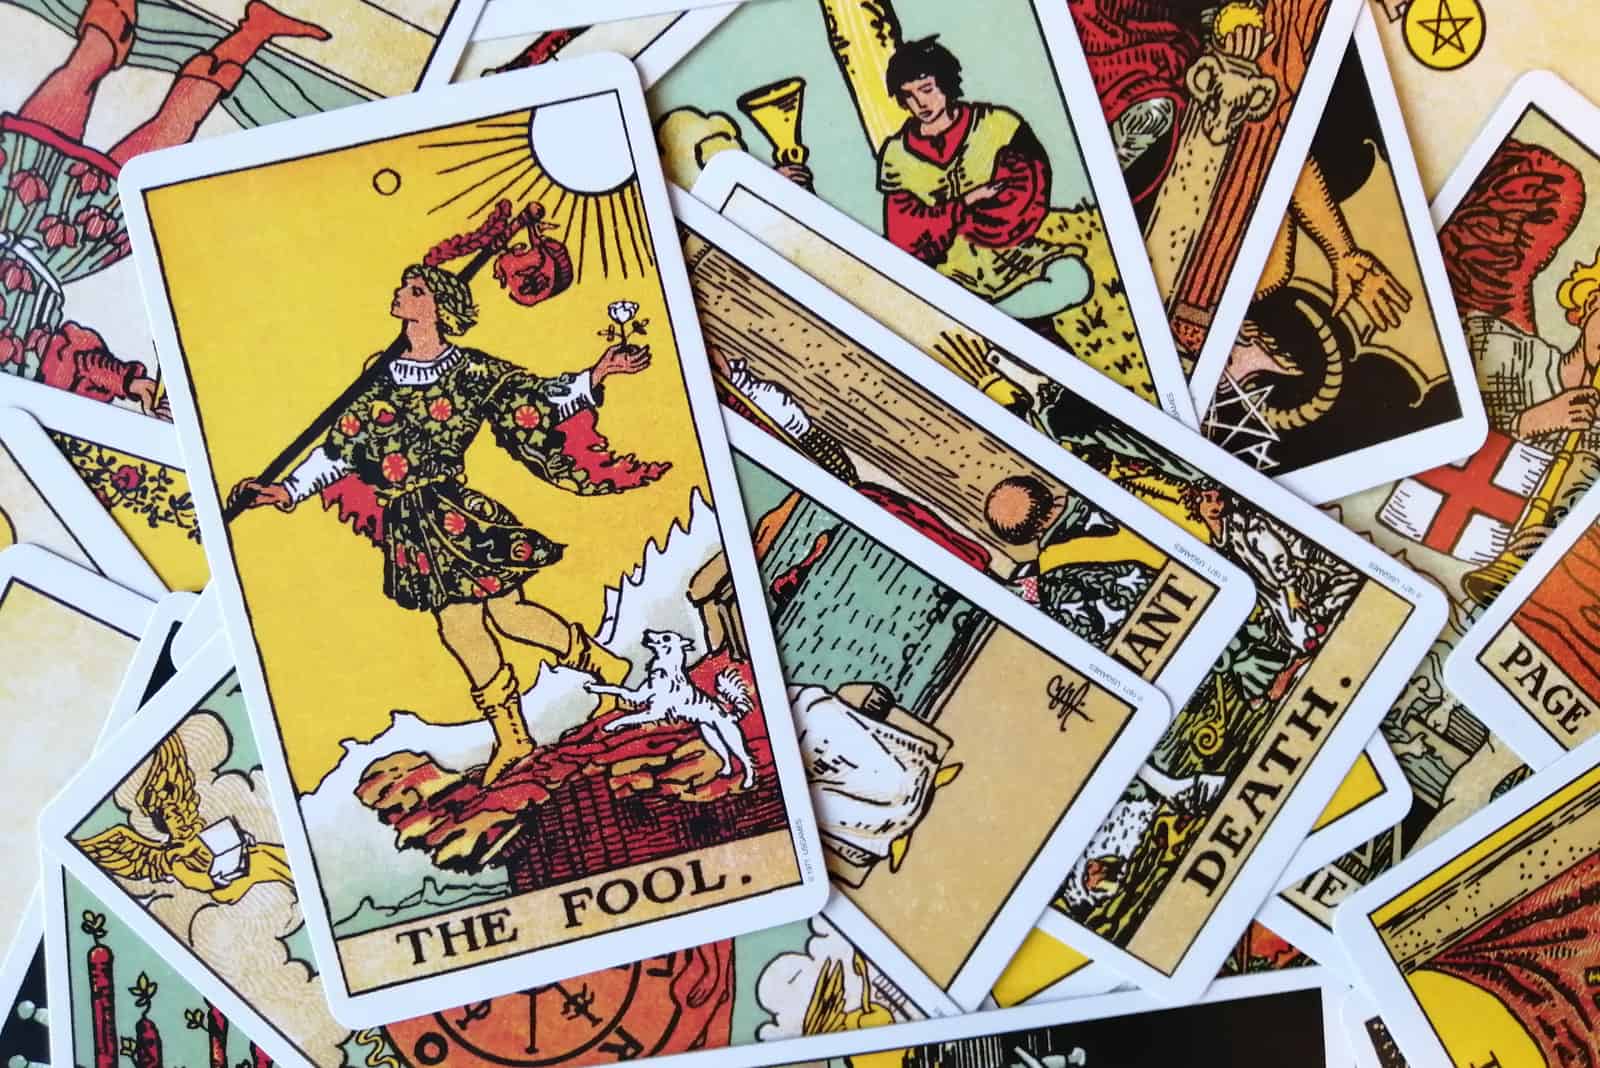 The Fool on top of rest of tarot cards